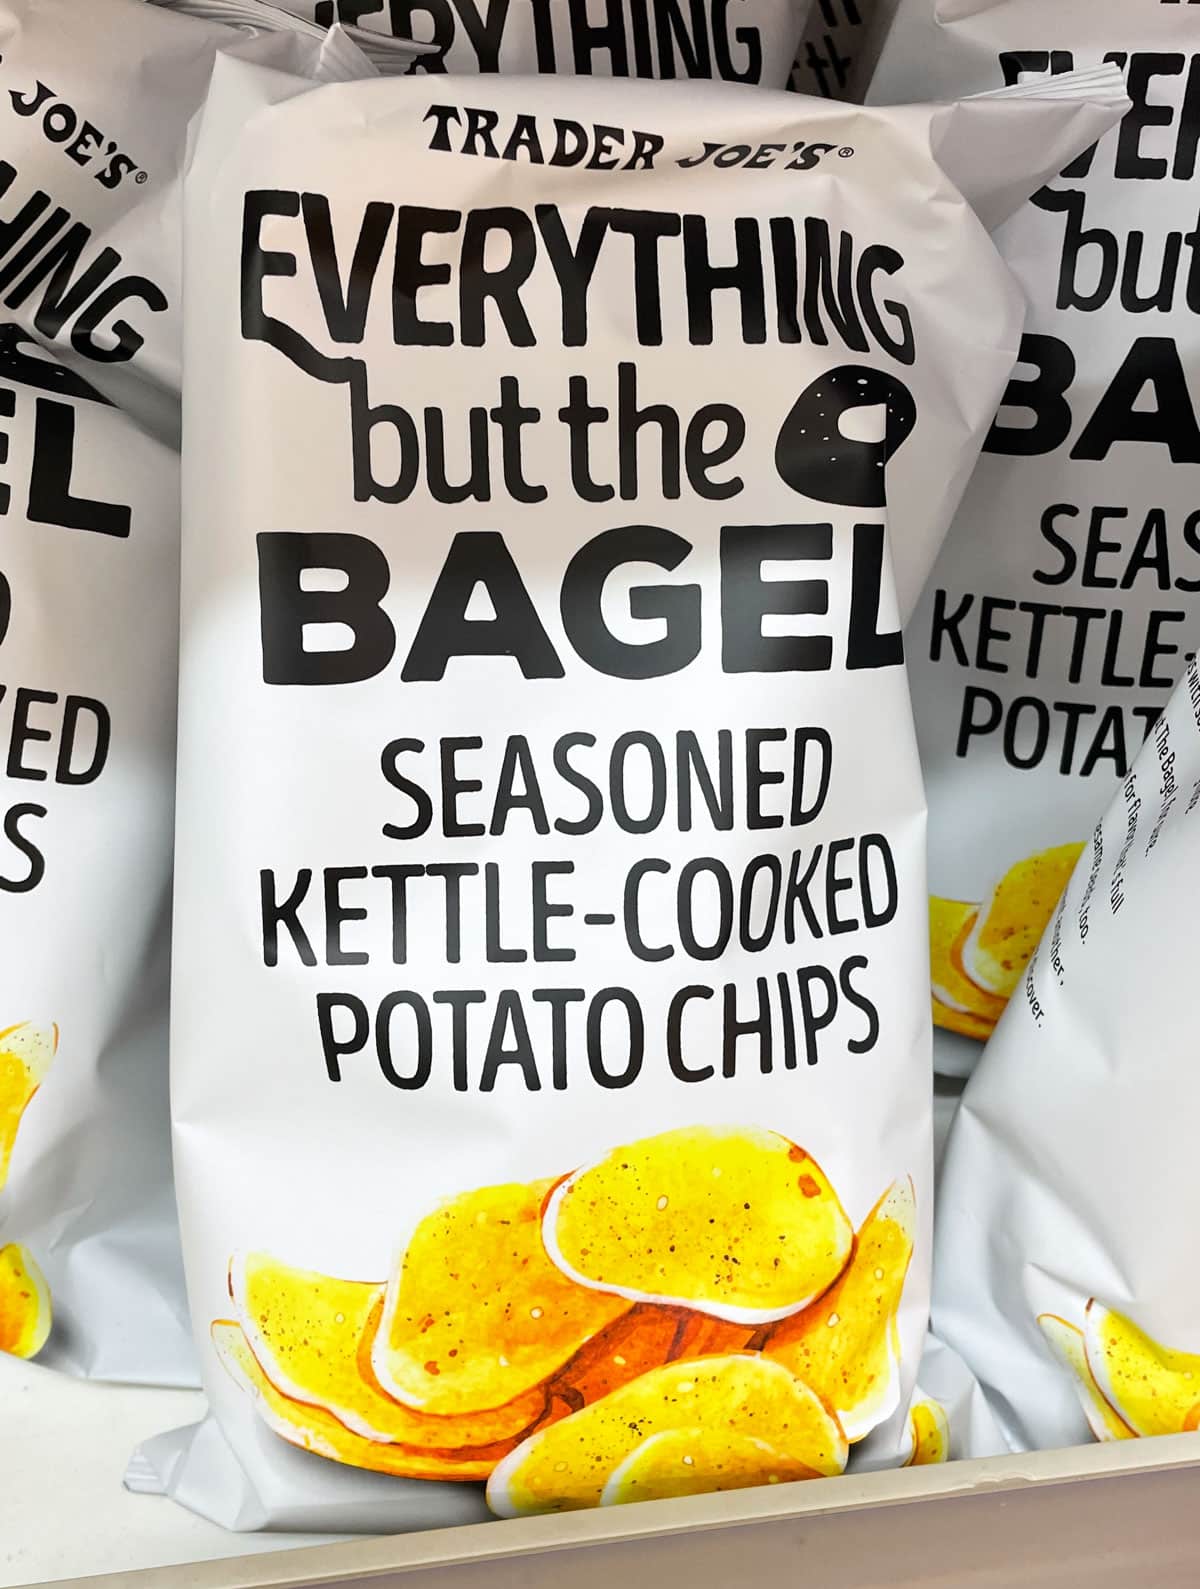 Trader joes everything but the bagel kettle cooked potato chips 